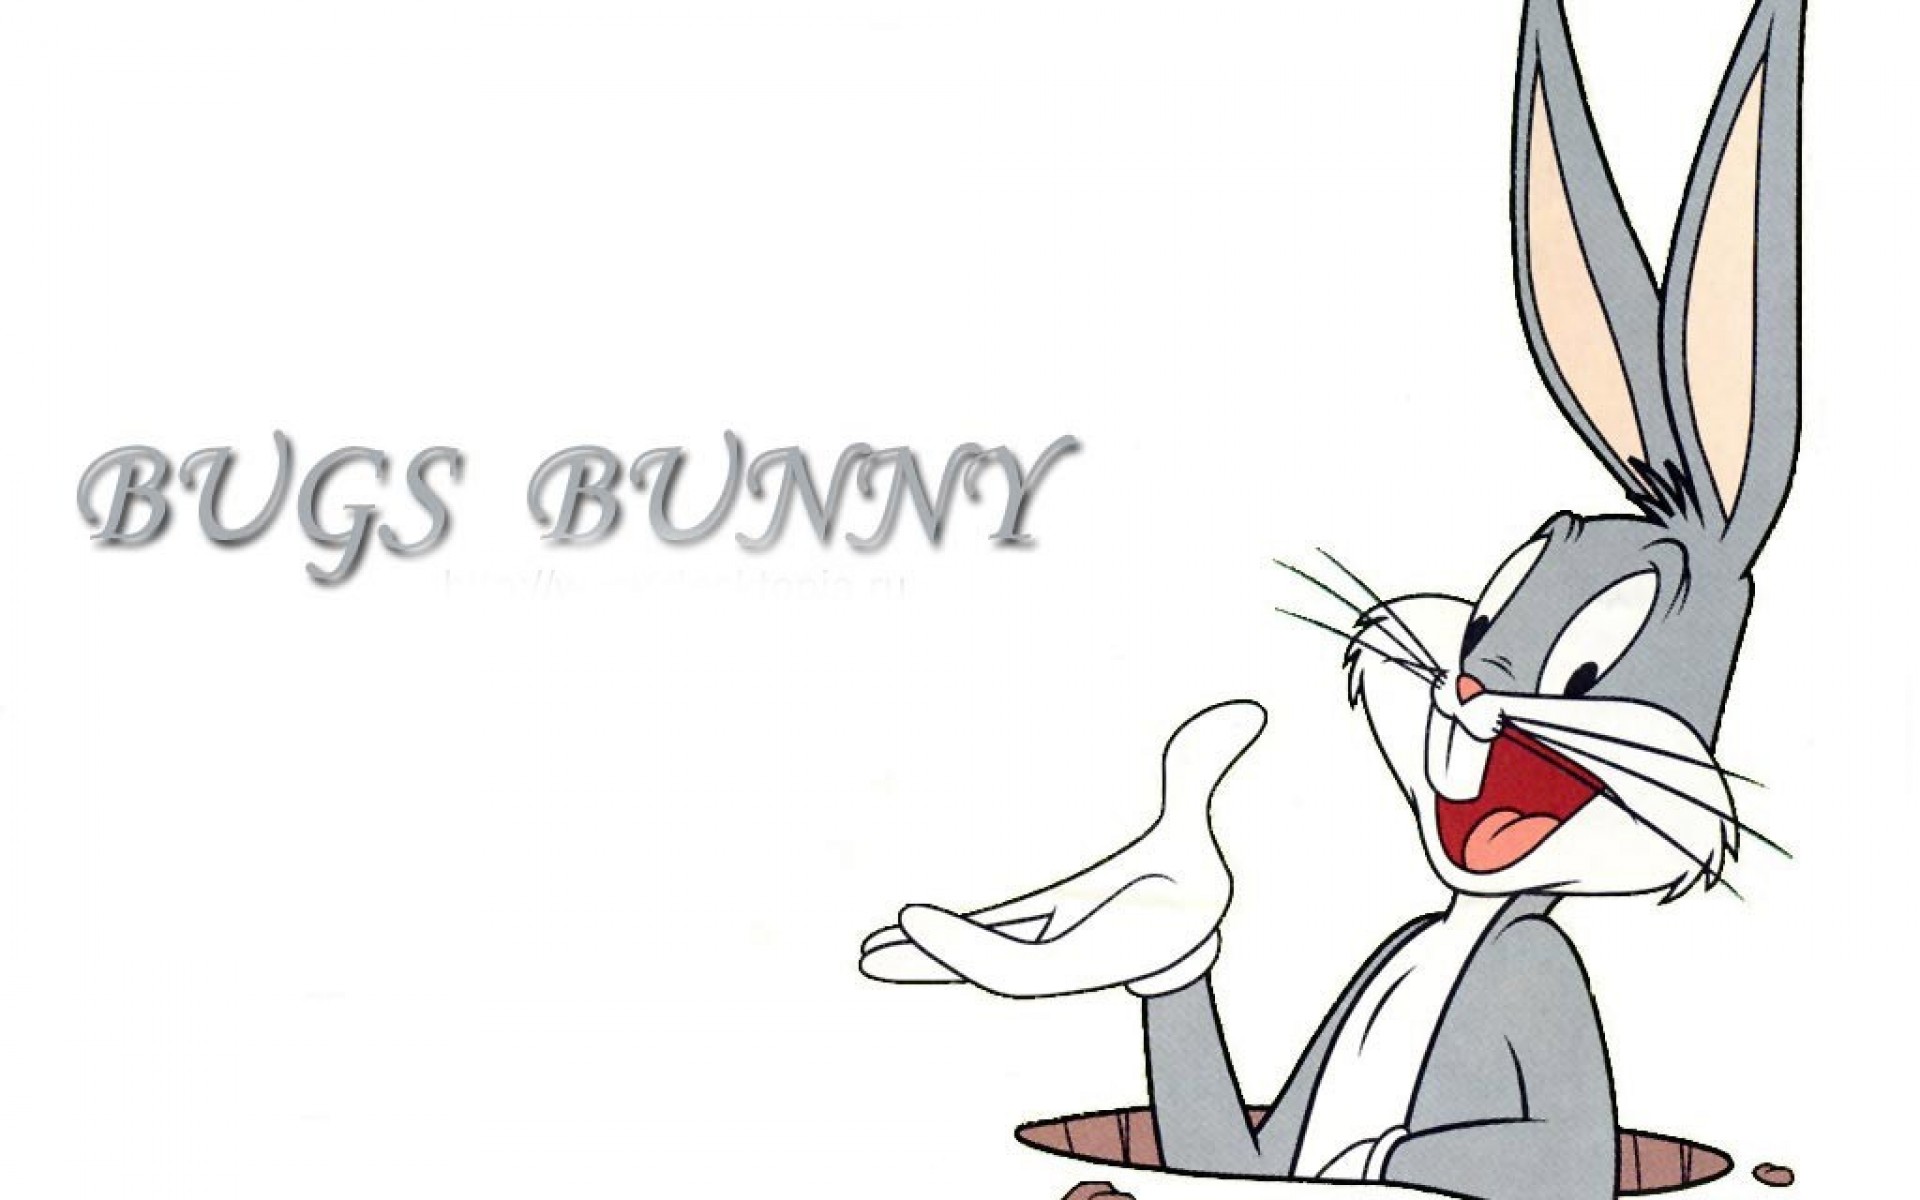 Bugs Bunny Backgrounds   Wallpaper High Definition High Quality